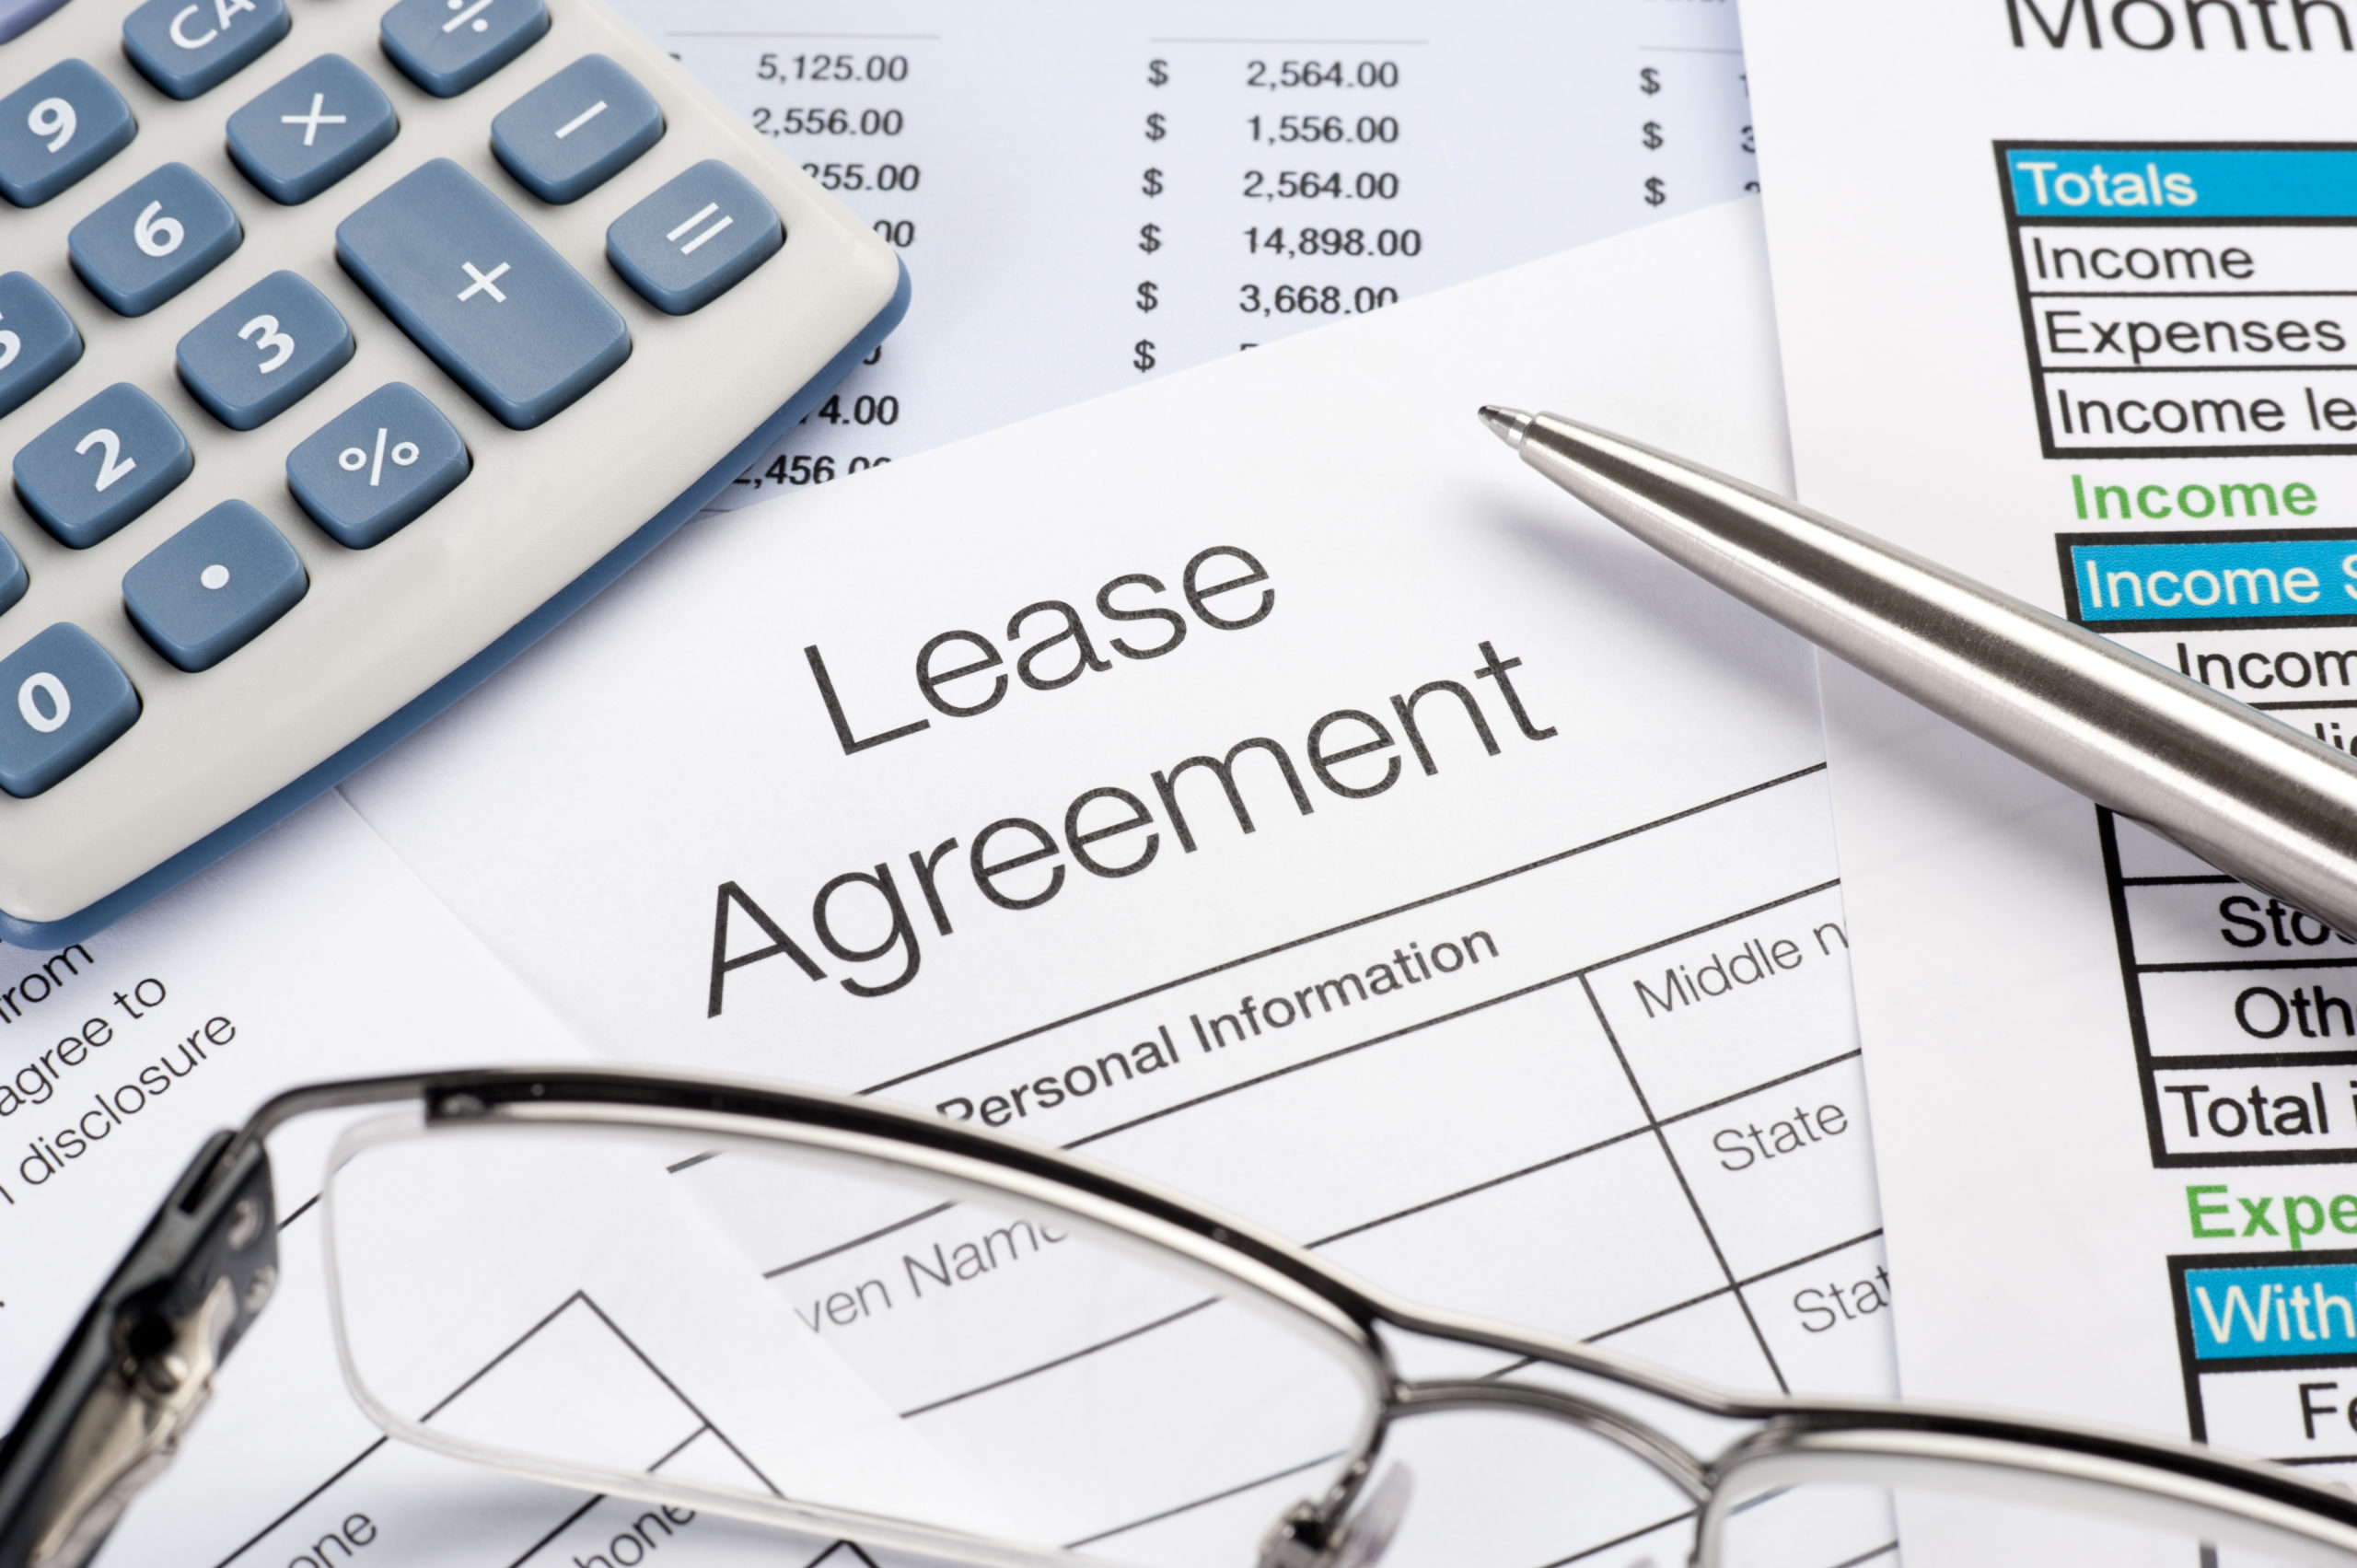 Are you ready for the new lease accounting rules?